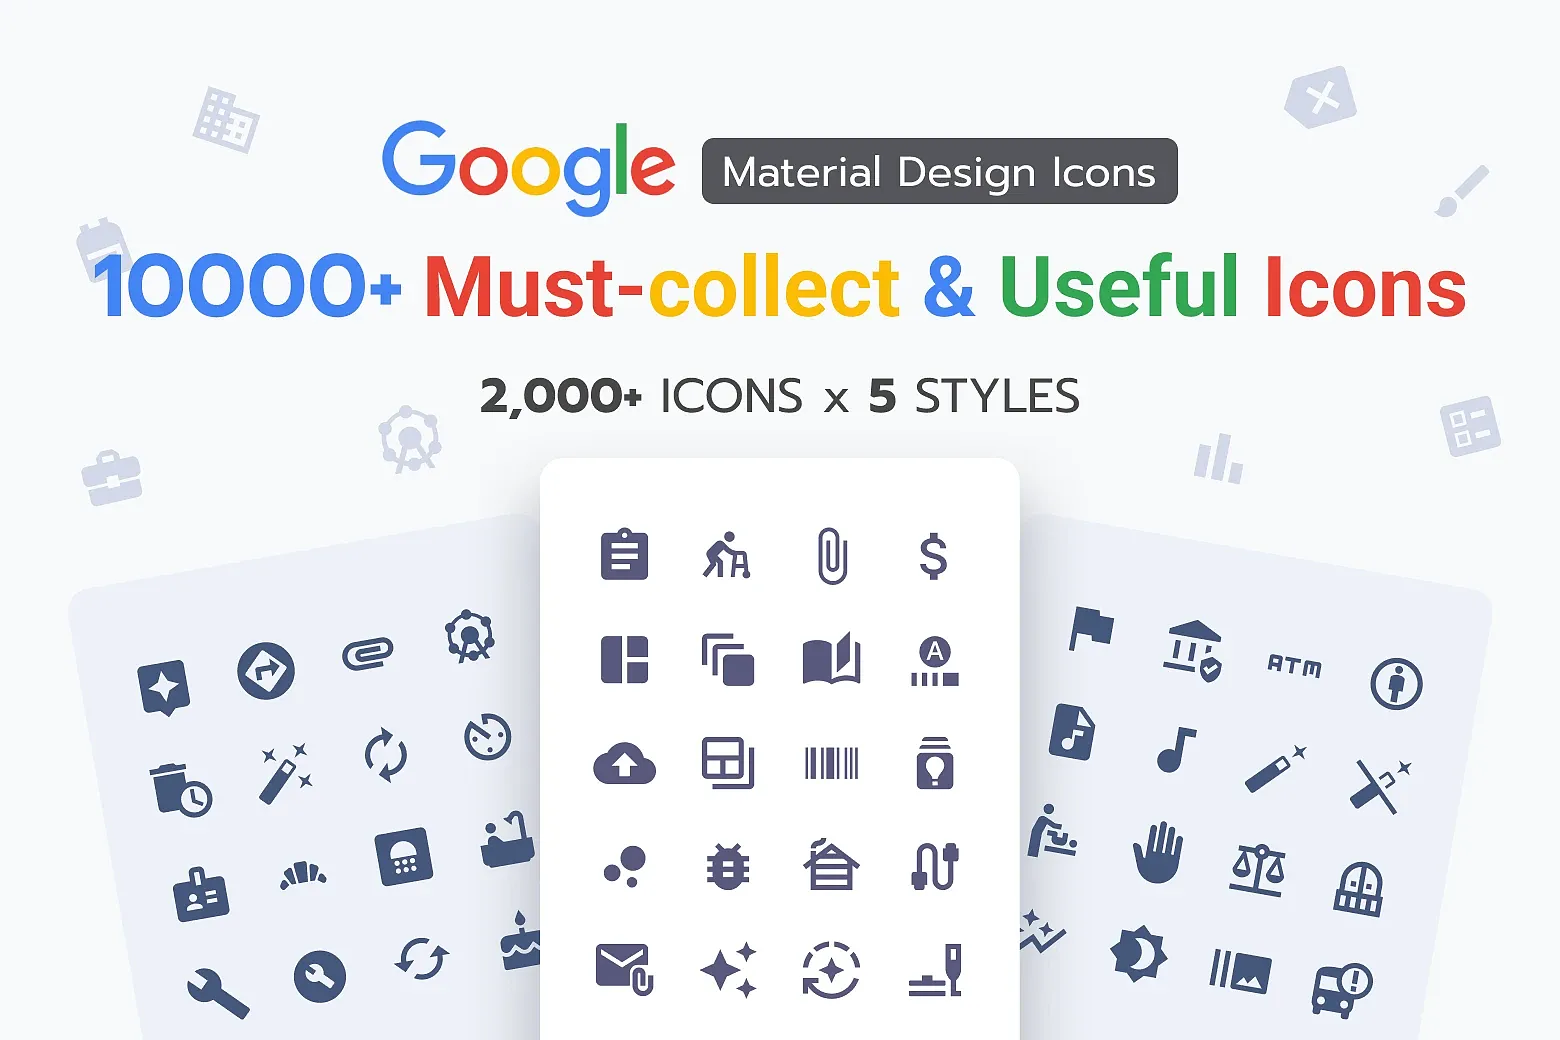 Free icons designed by Google